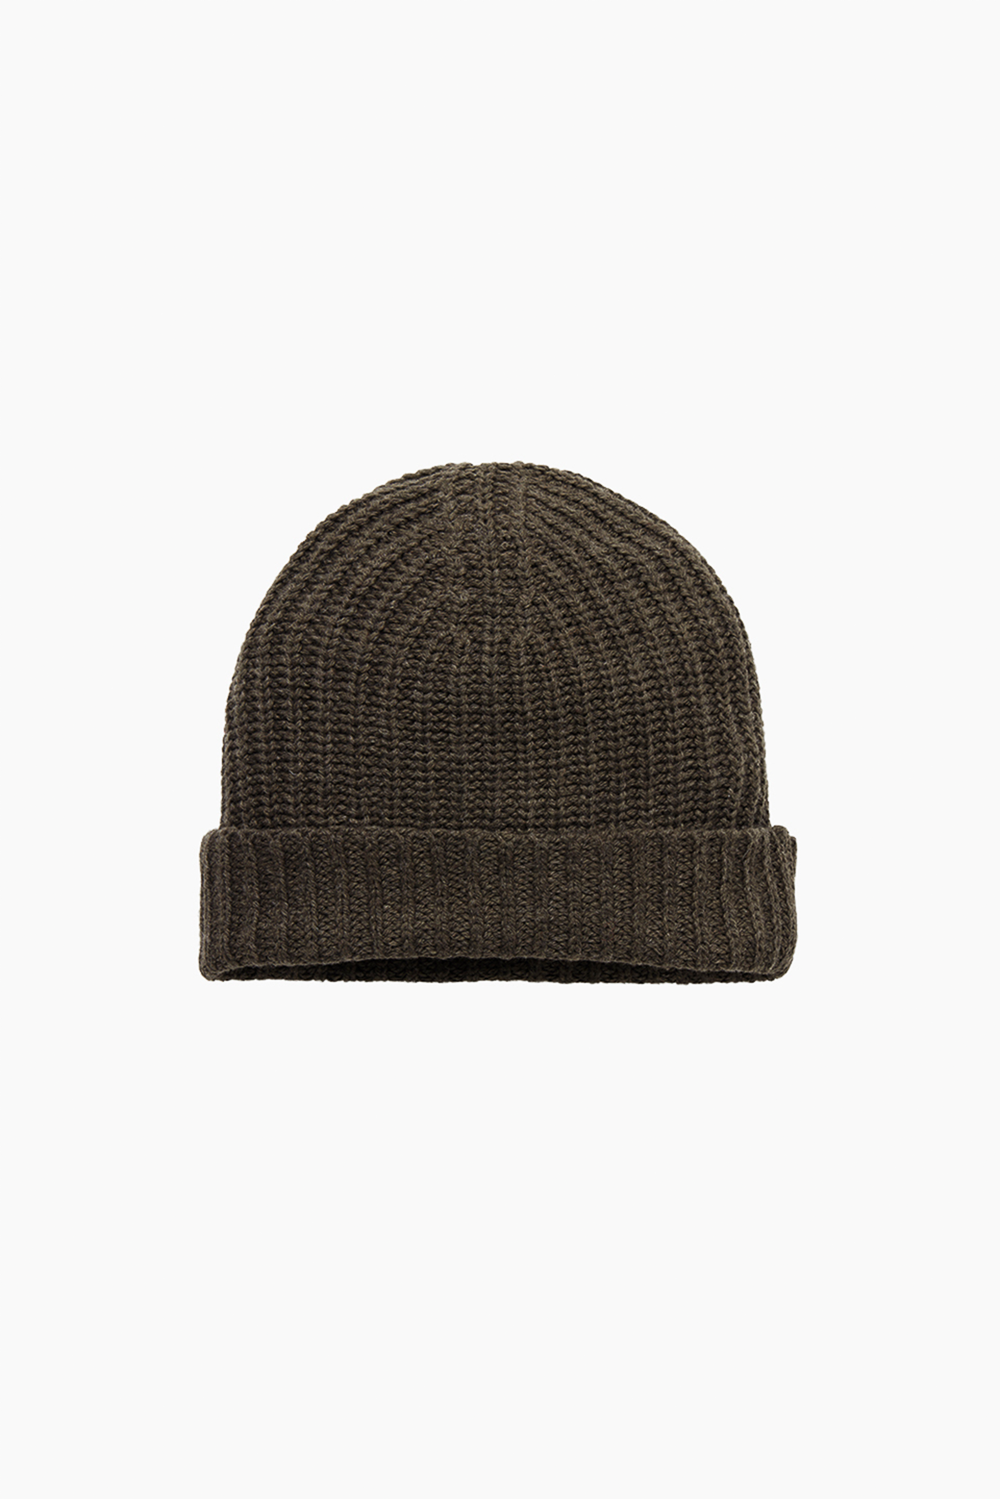 CHUNKY RIB KNIT CLASSIC KNIT BEANIE - SHADOW Featured Image